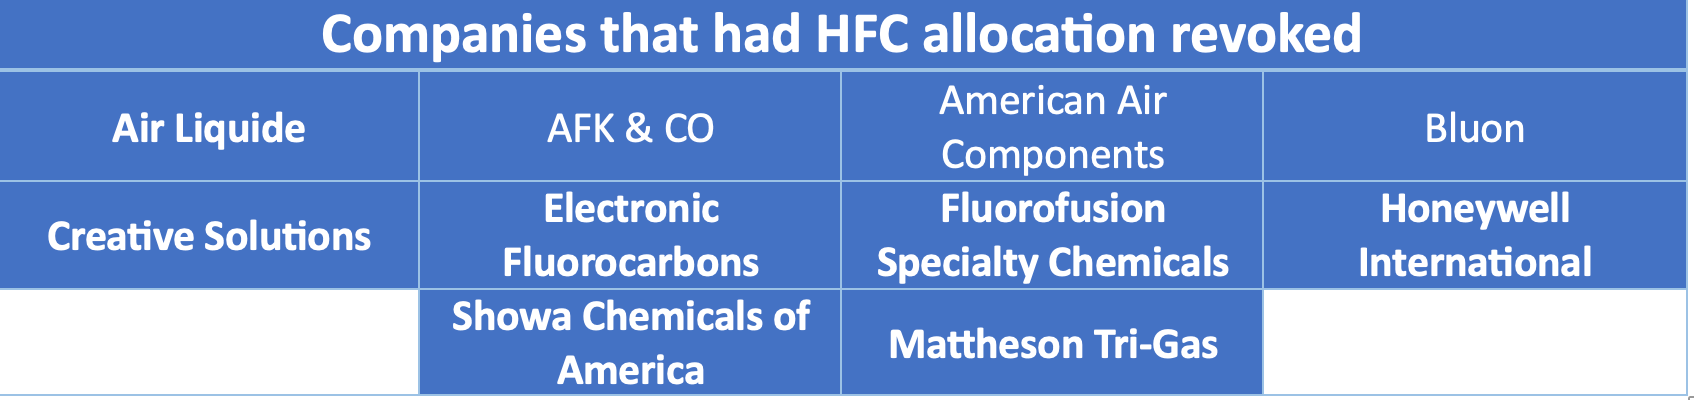 Companies that had HFC allocation revoked